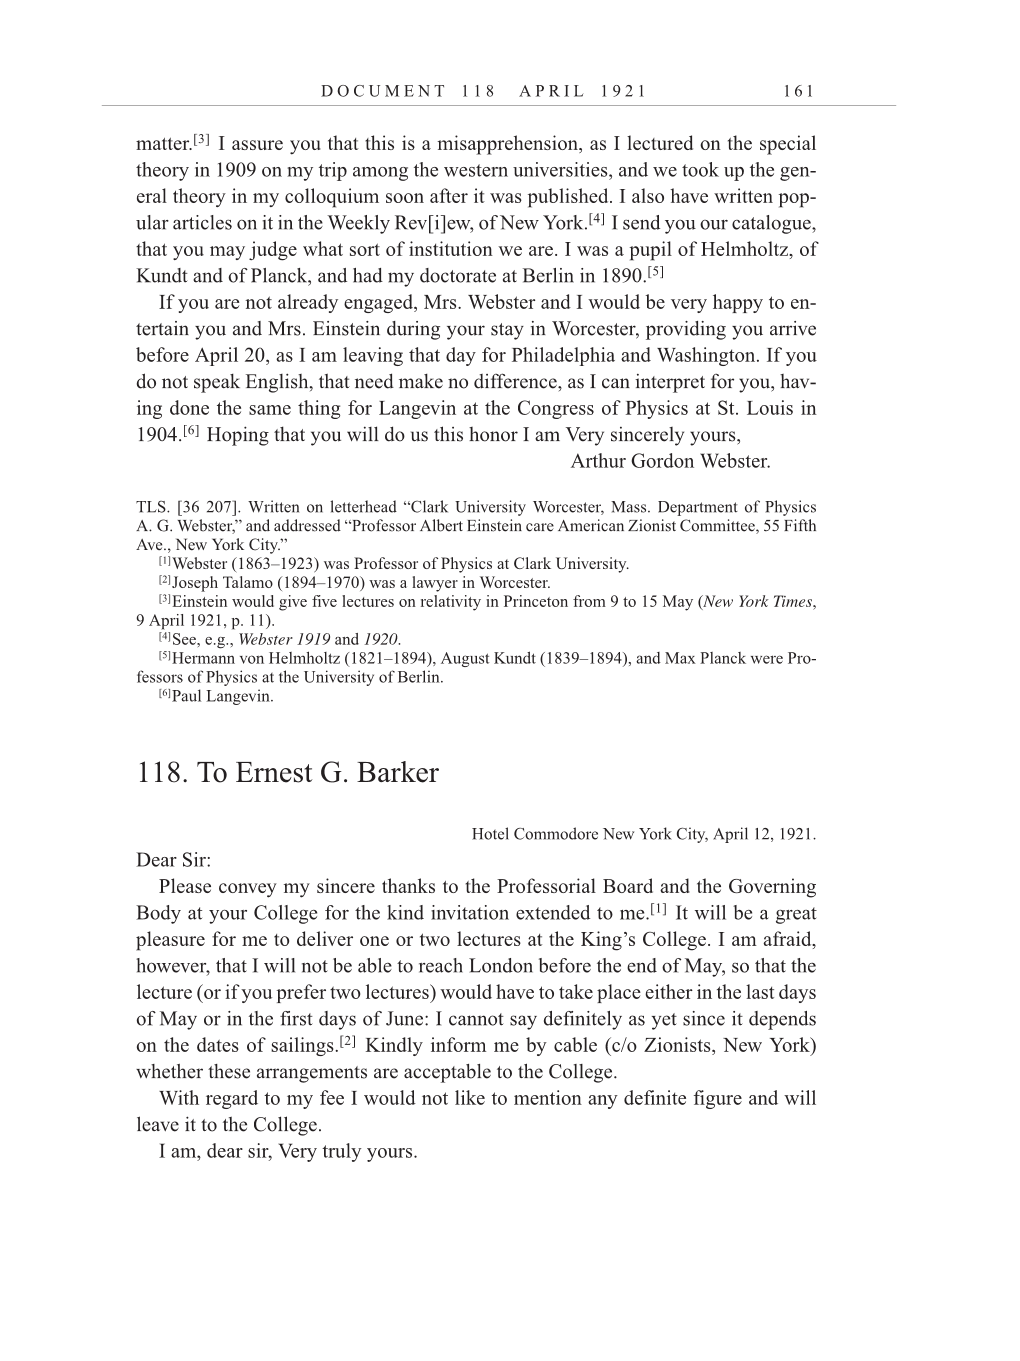 Volume 12: The Berlin Years: Correspondence January-December 1921 page 161